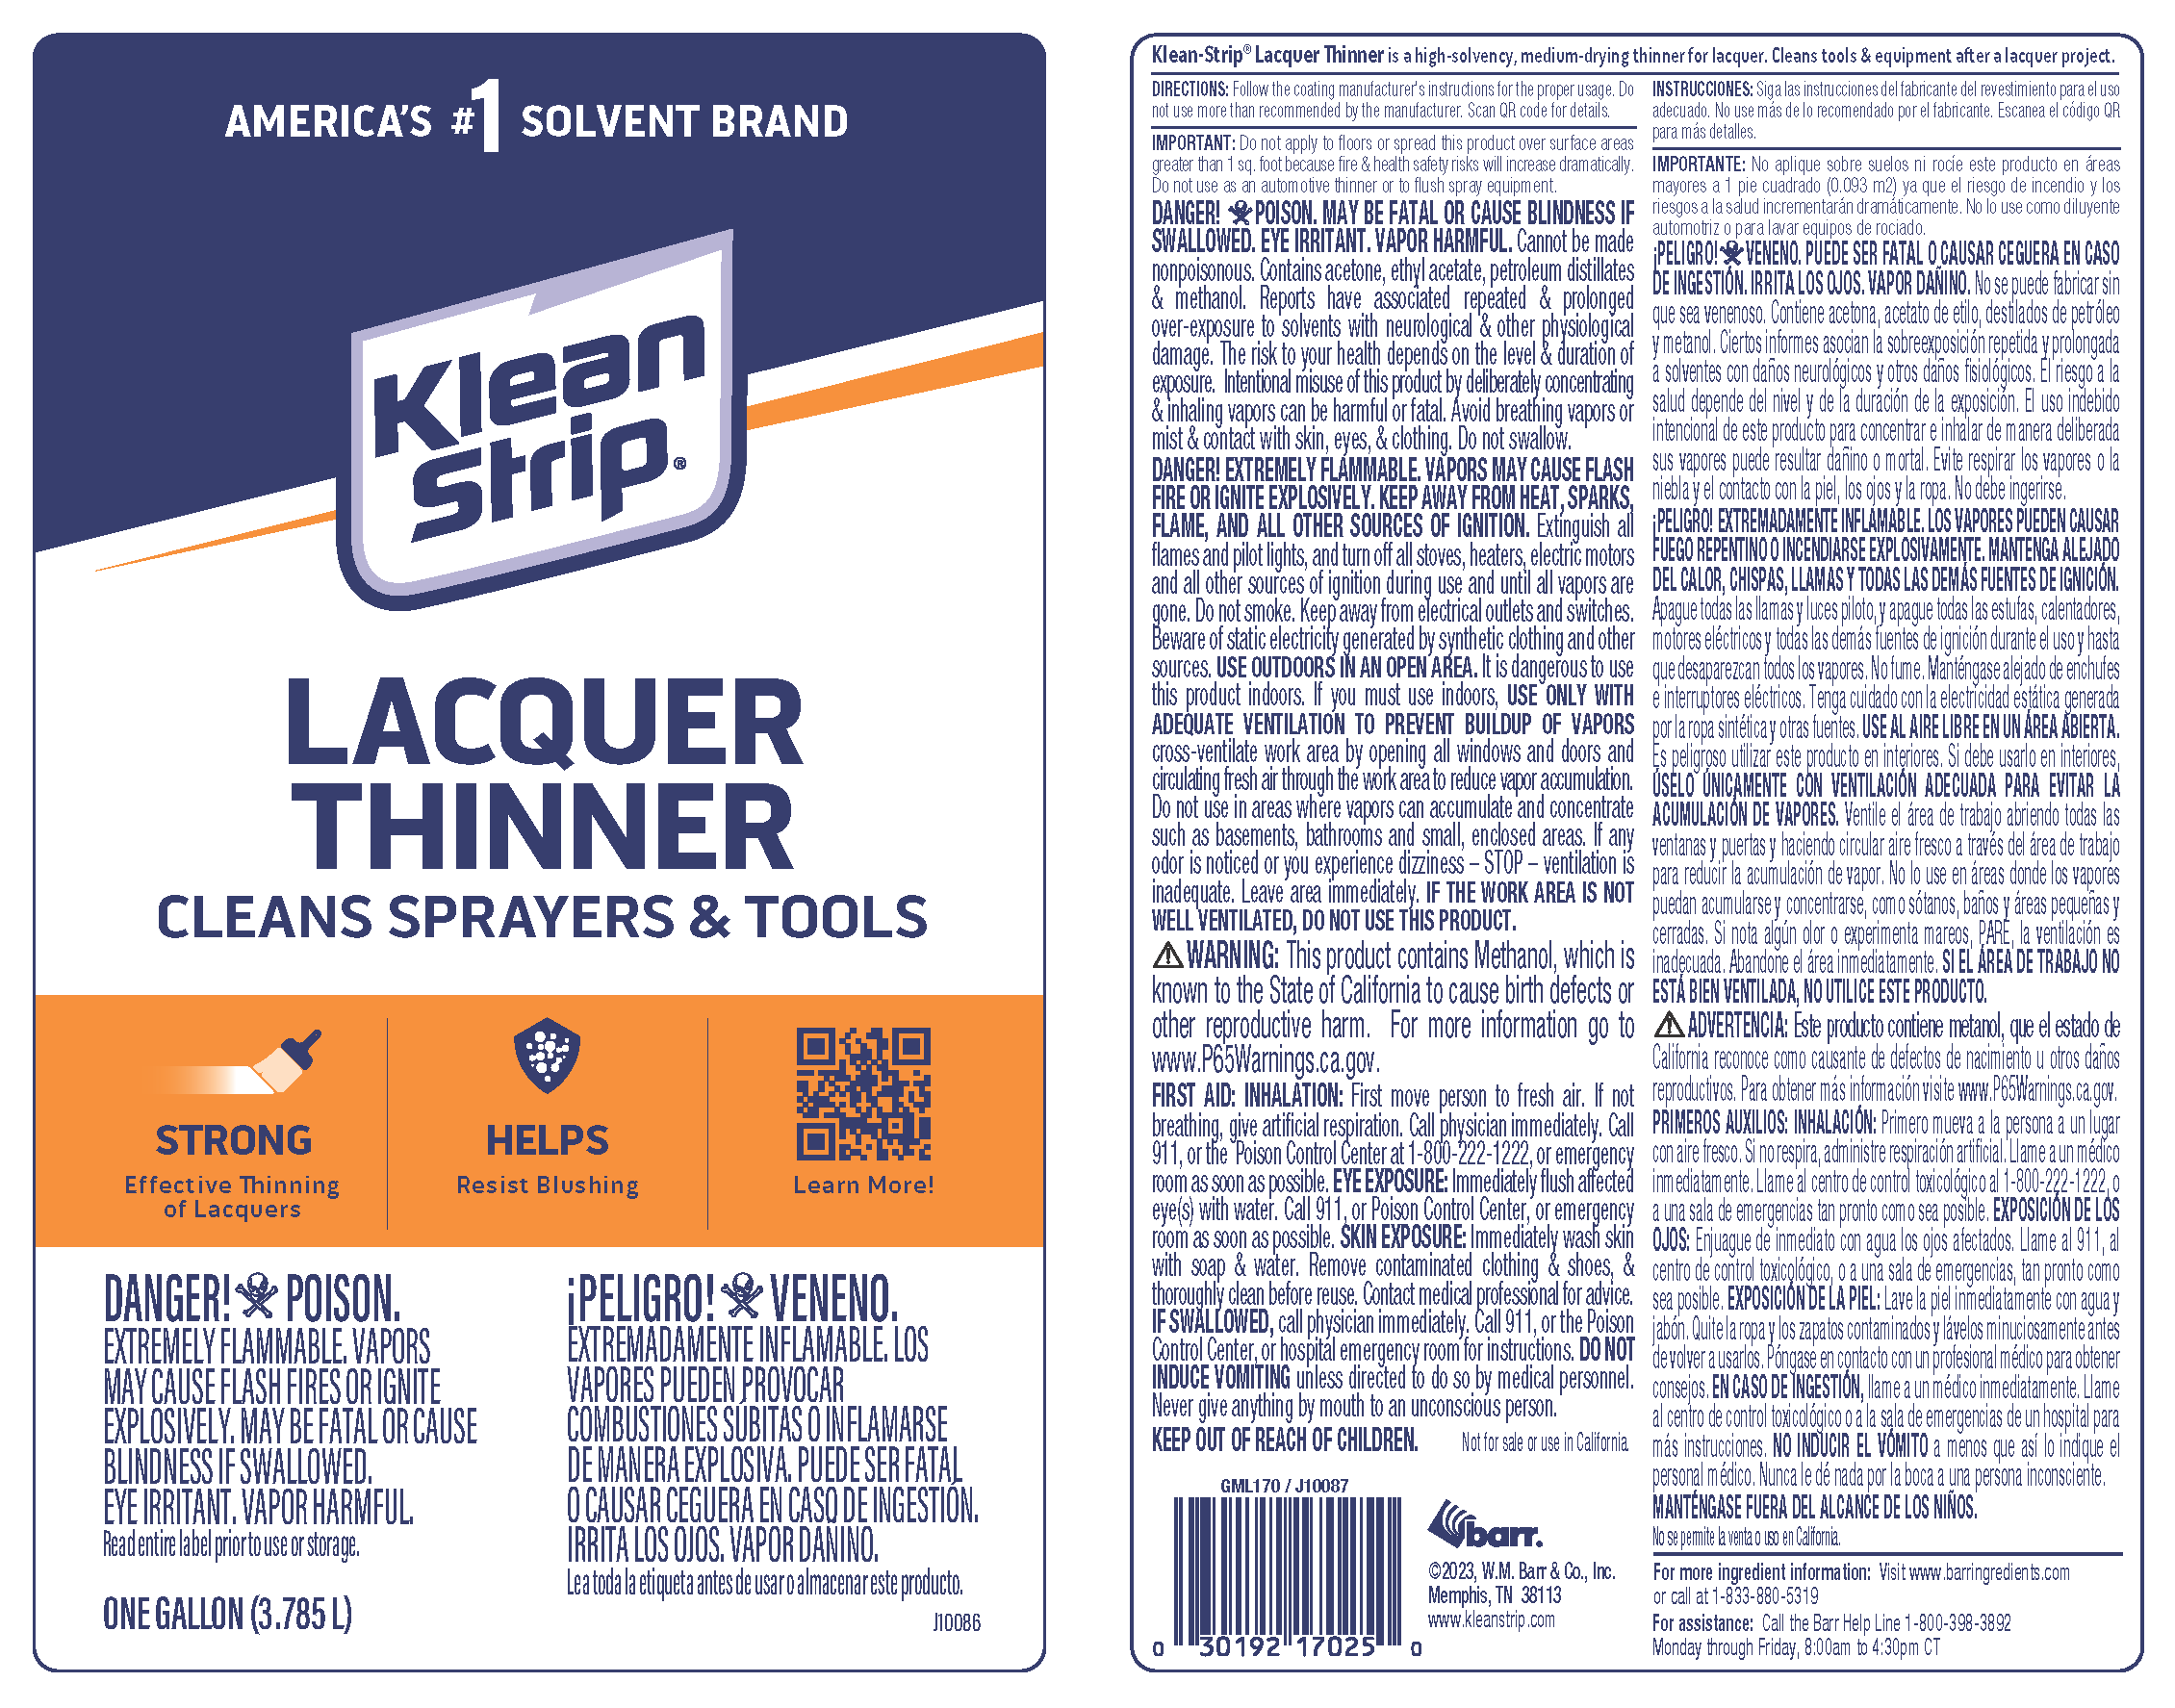  Klean-Strip GML170 LACQUER THINNER - Pack of 1